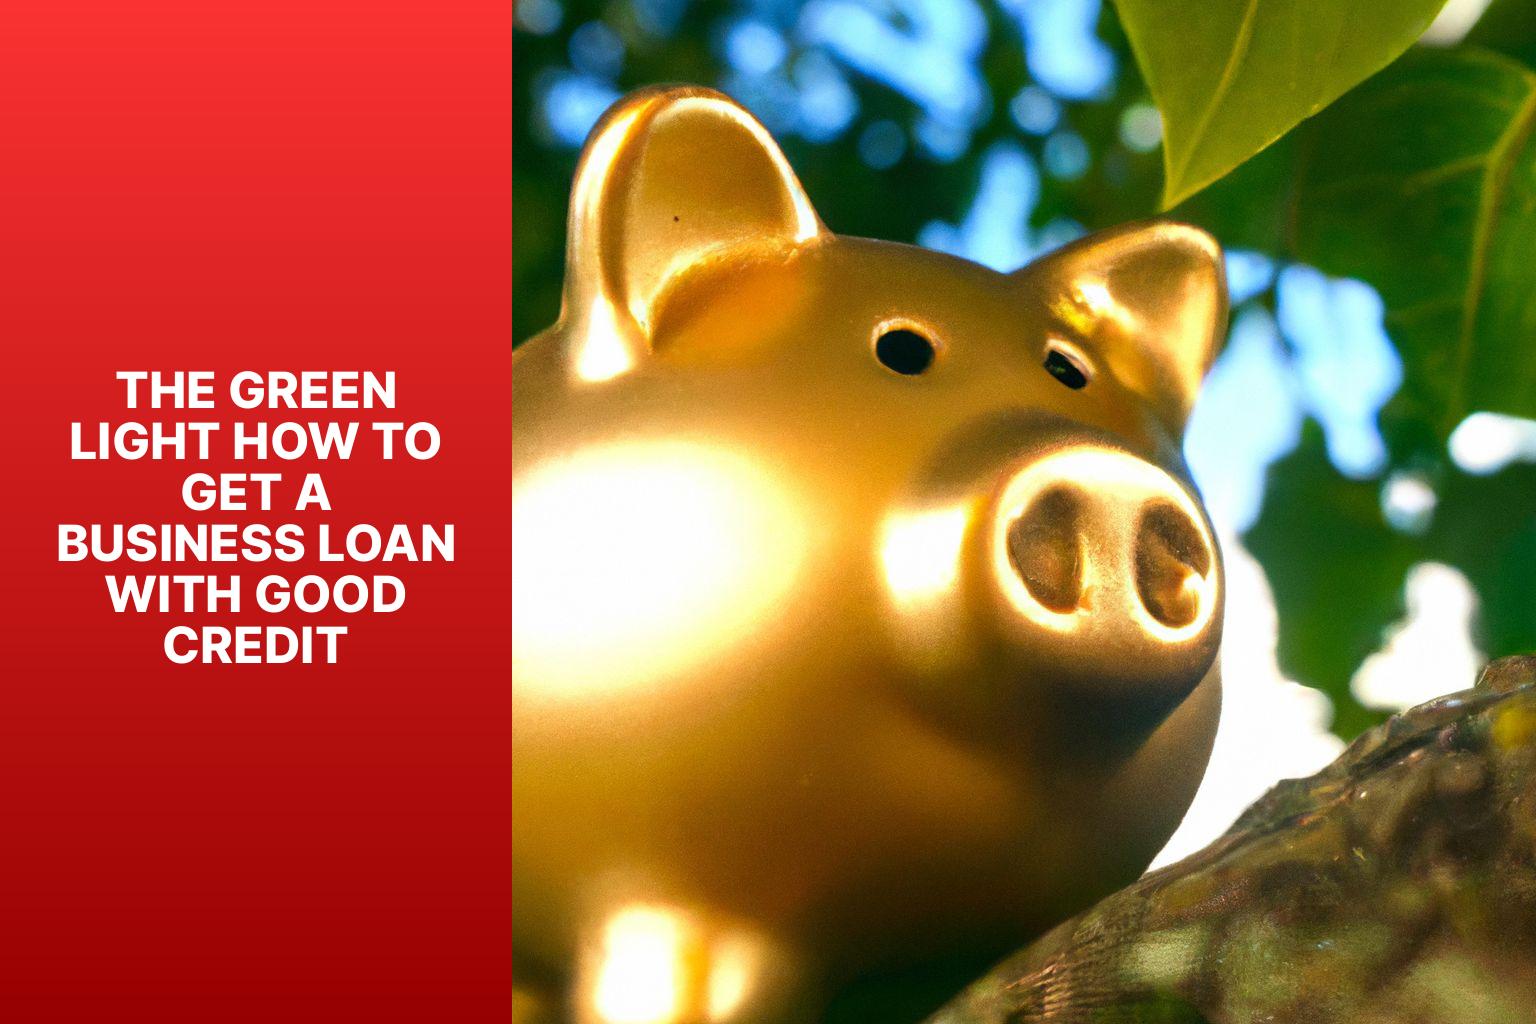 The Green Light How to Get a Business Loan with Good Credit